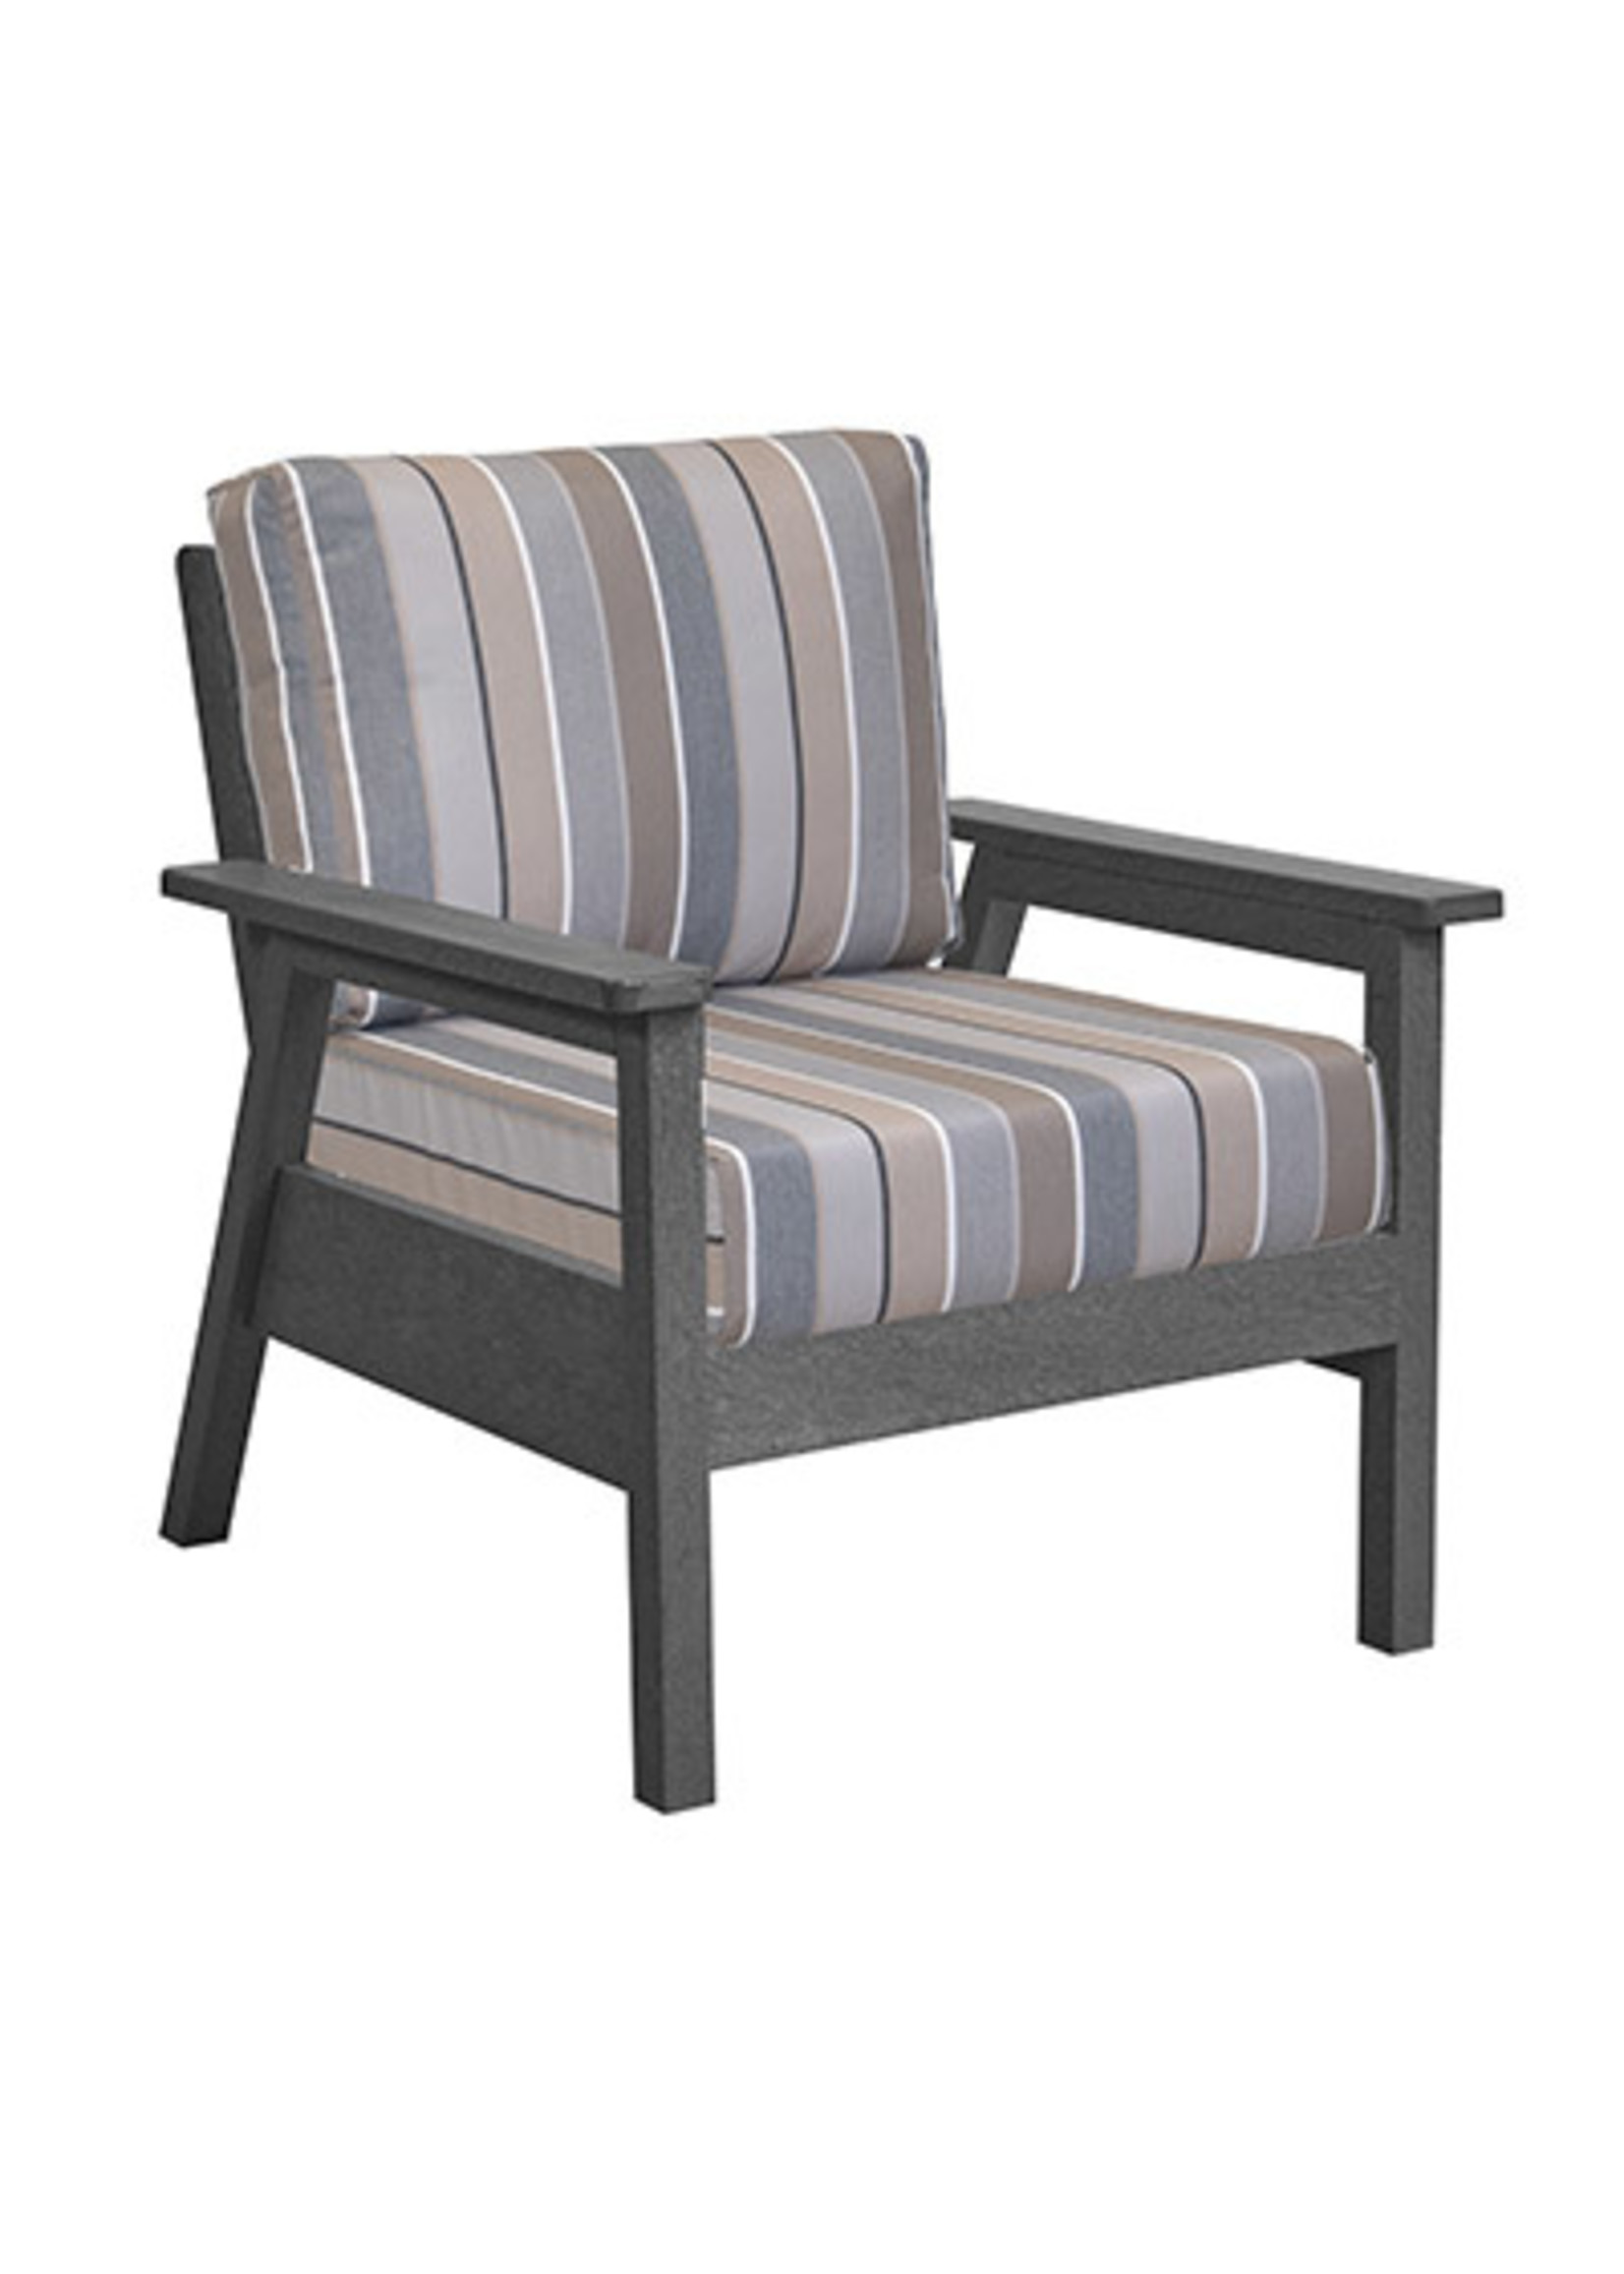 C.R. Plastic Products DSF281 * Tofino Armchair